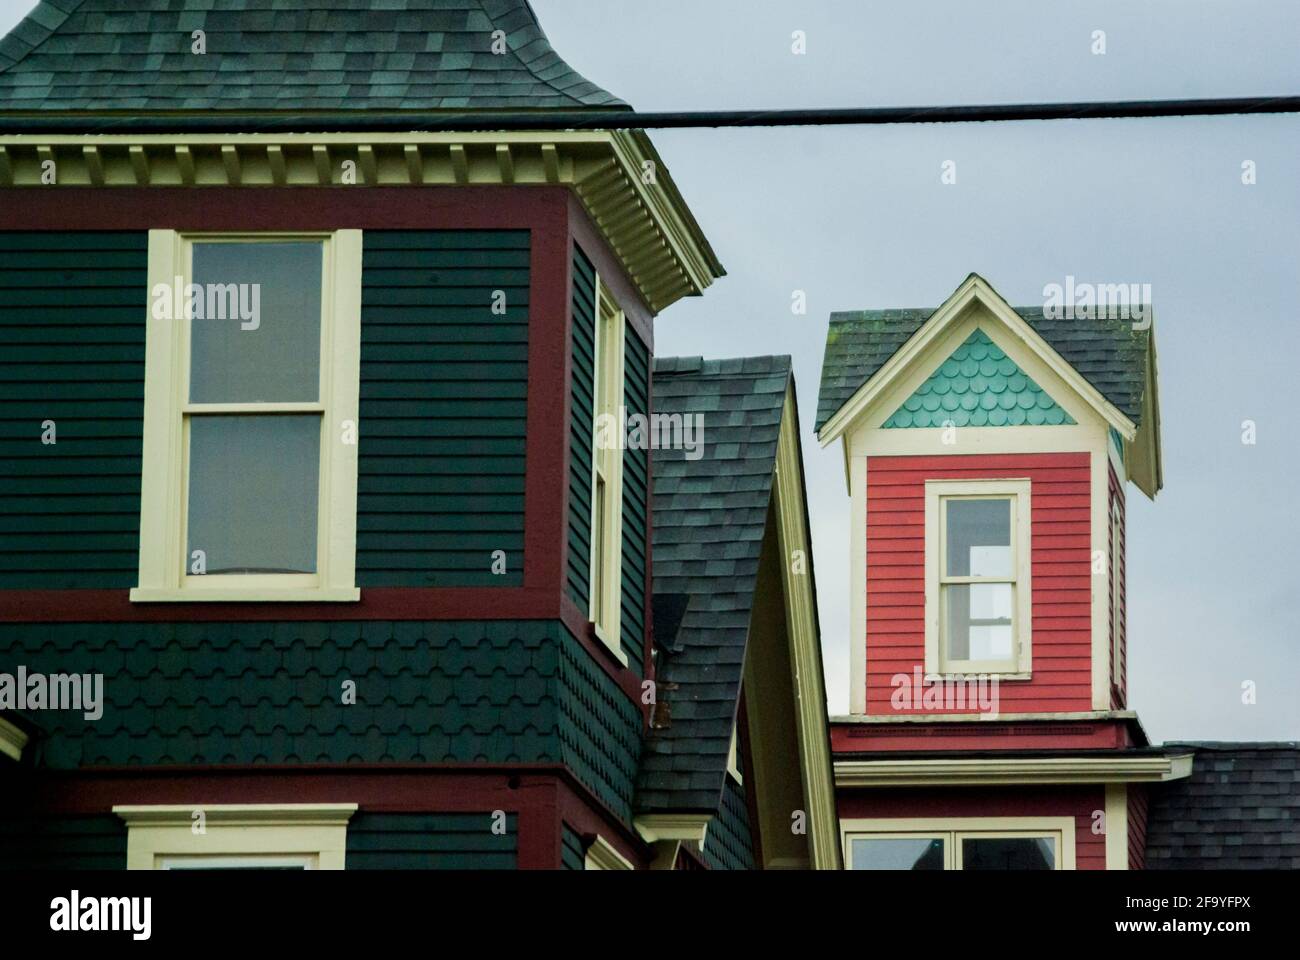 Towers / turrets on colourful wooden houses in Stowe, Vermont, USA. Stock Photo